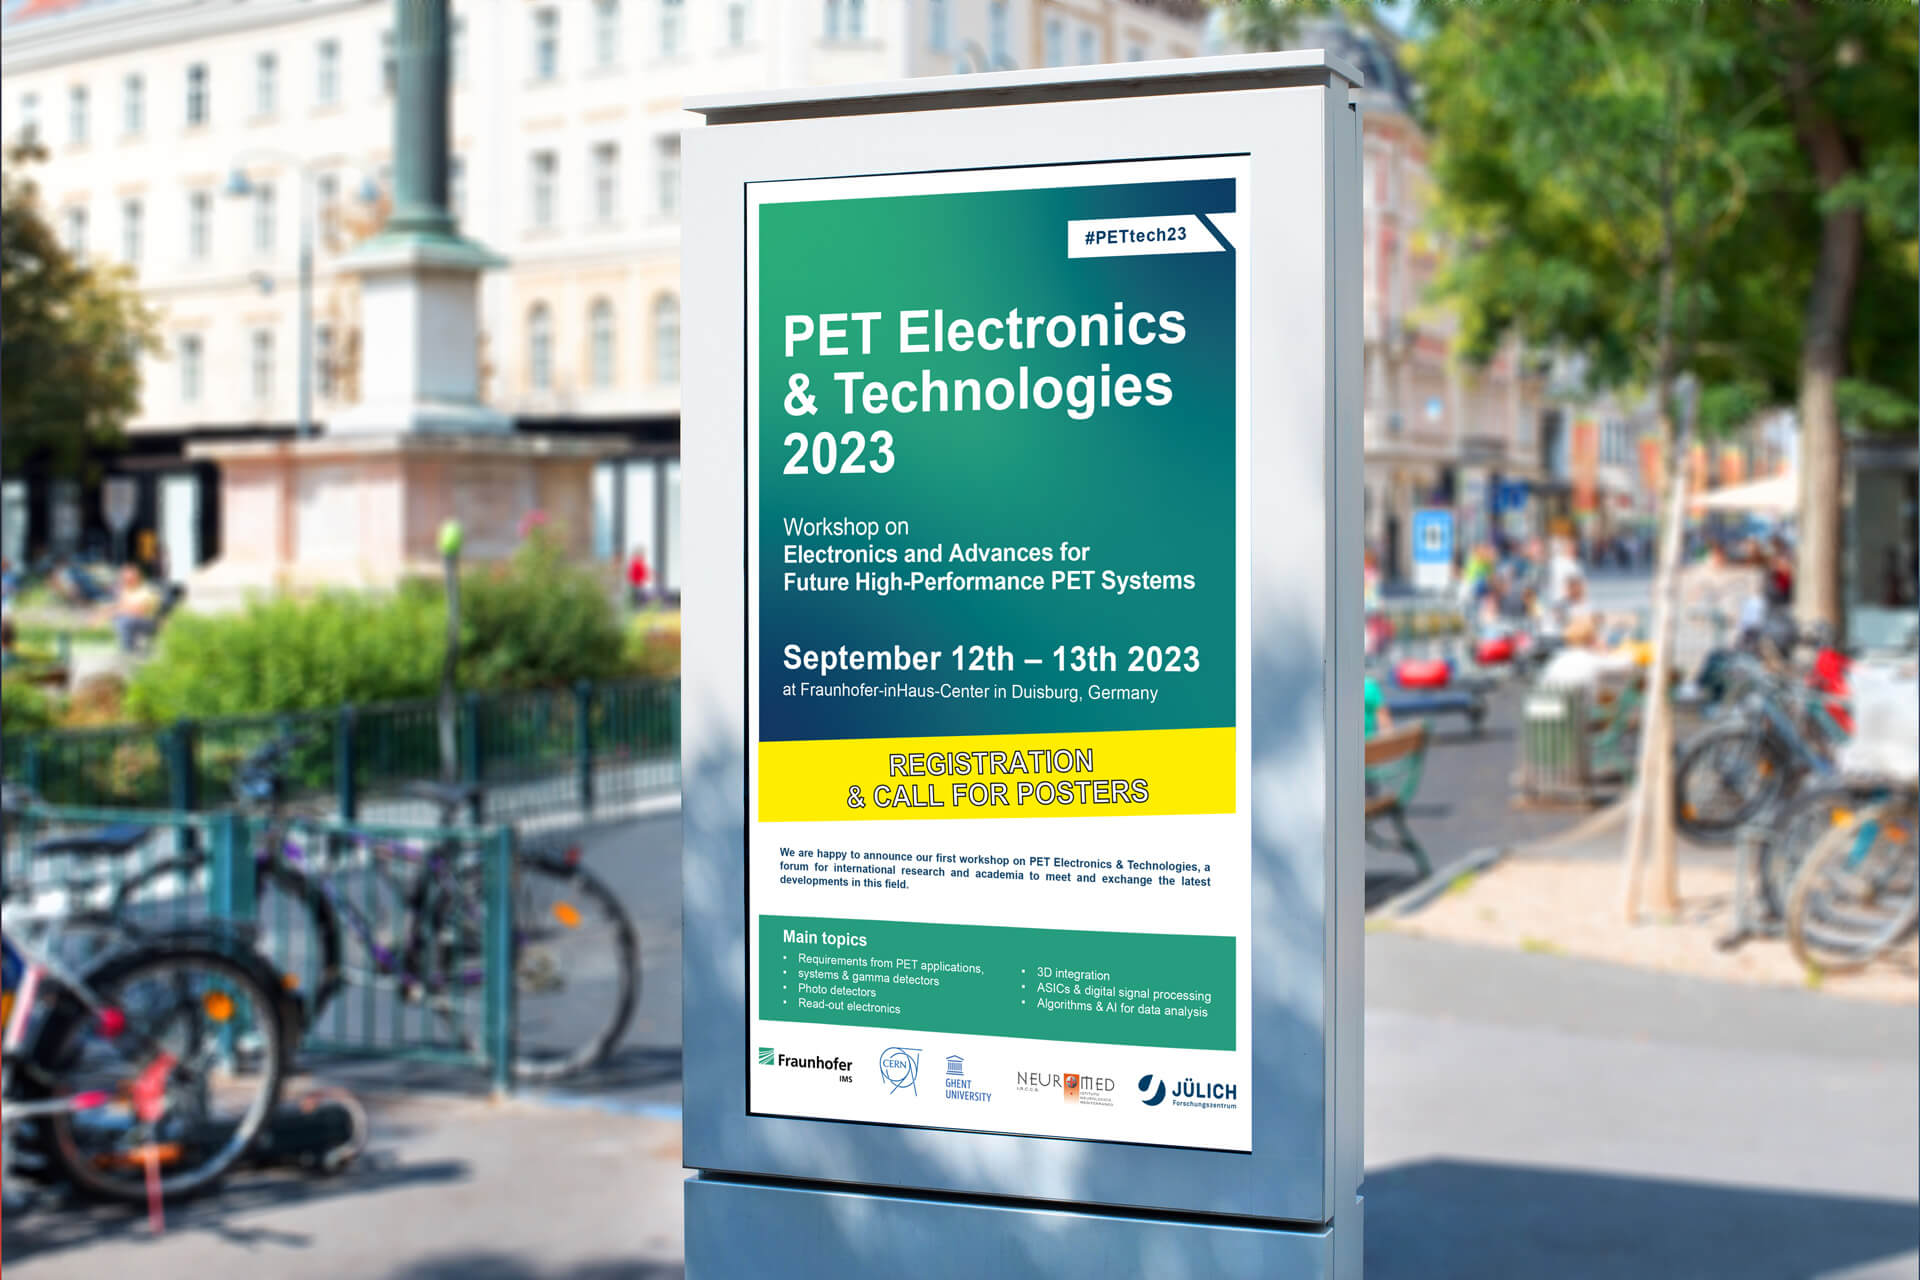 Call for posters and registration: Workshop on Electronics and Advances for Future High-Performance PET Systems